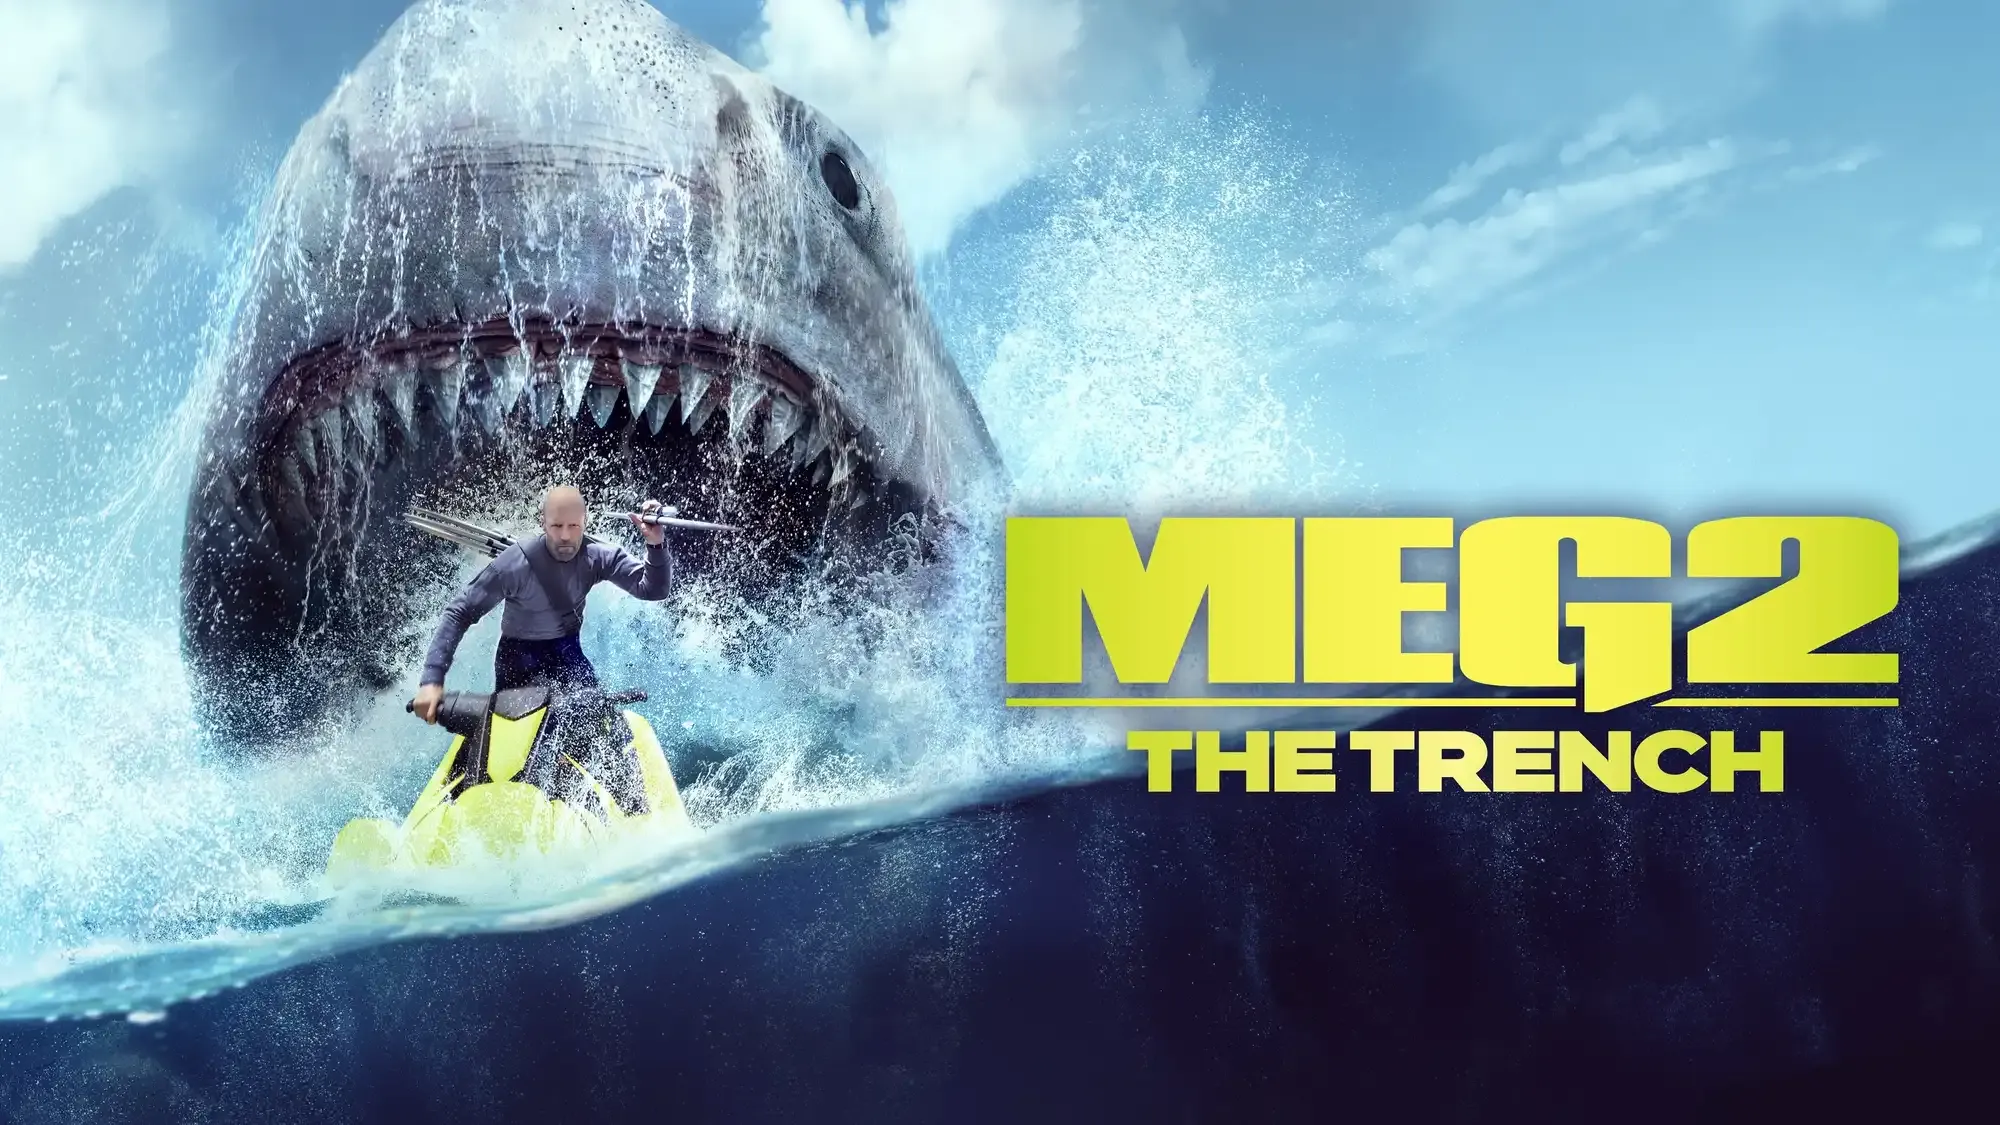 Meg 2: The Trench movie review